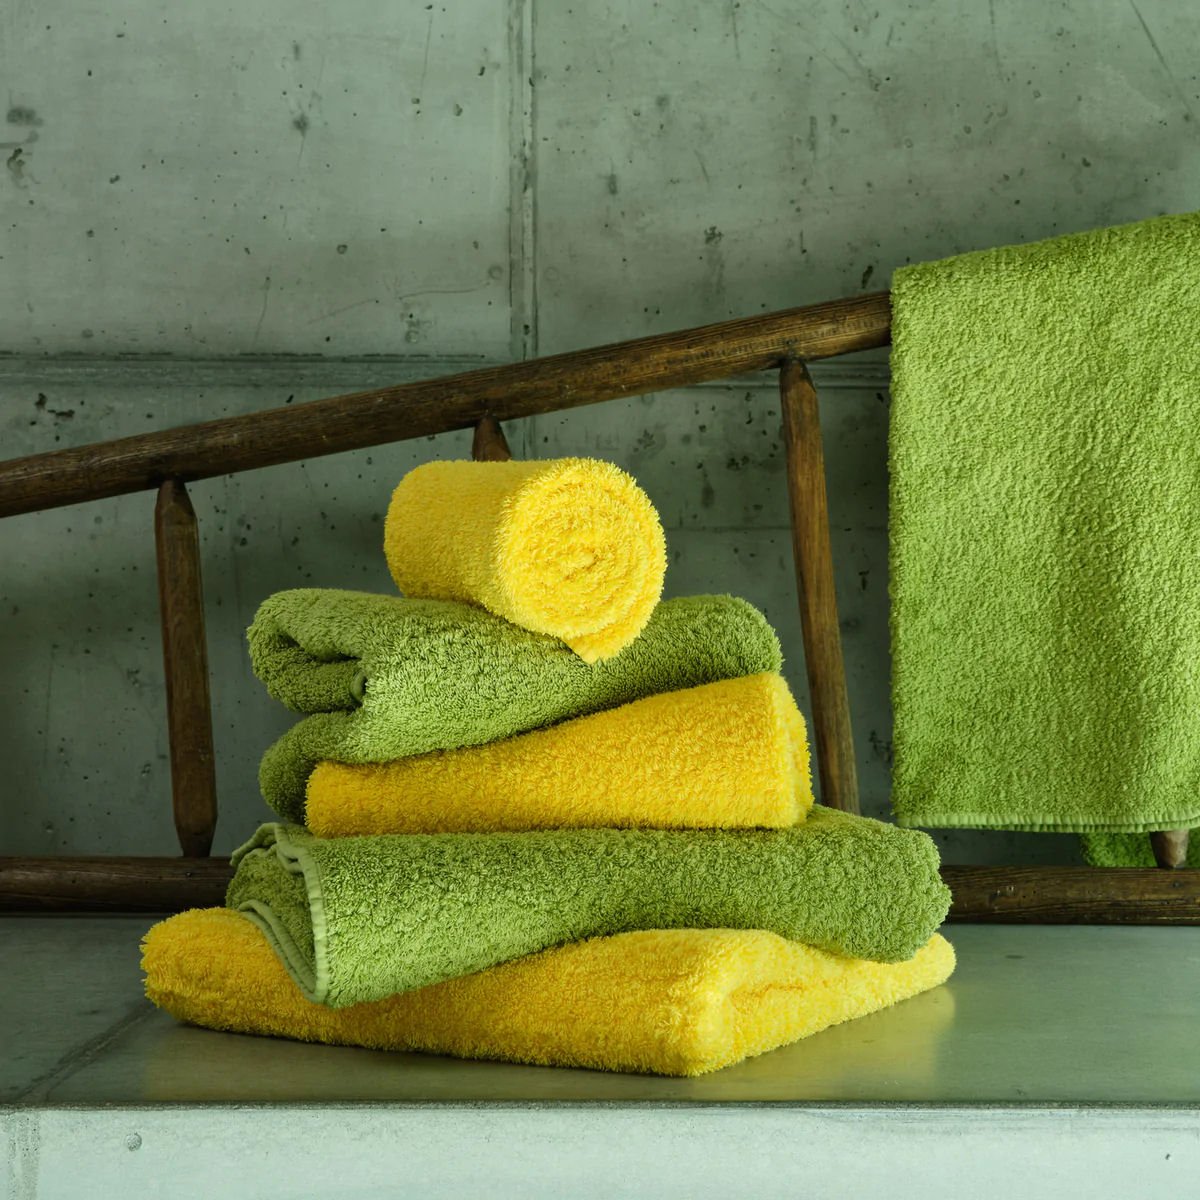 Rich Yellow Super Pile Bath Towels by Abyss & Habidecor | 830 Banane - |VESIMI Design| Luxury and Rustic bathrooms online